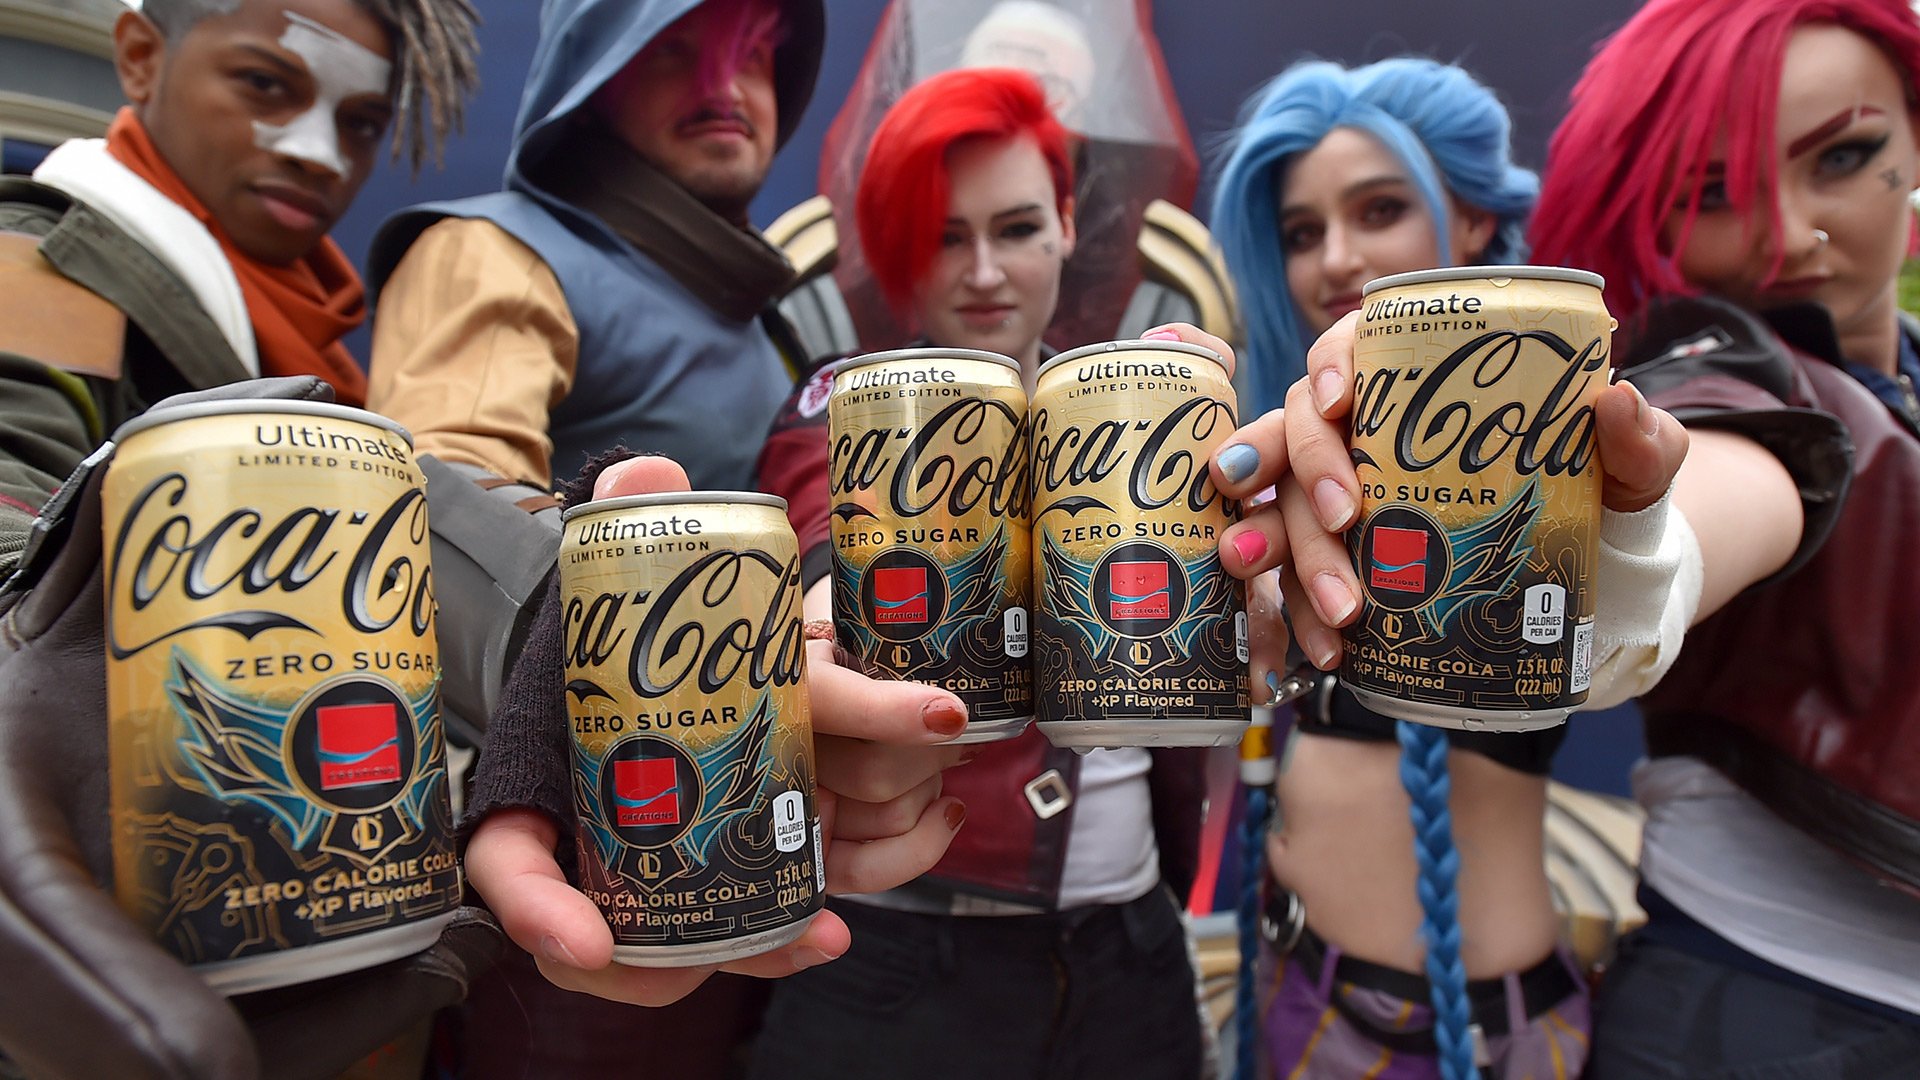 Coca-Cola's new League of Legends collaboration claims to taste